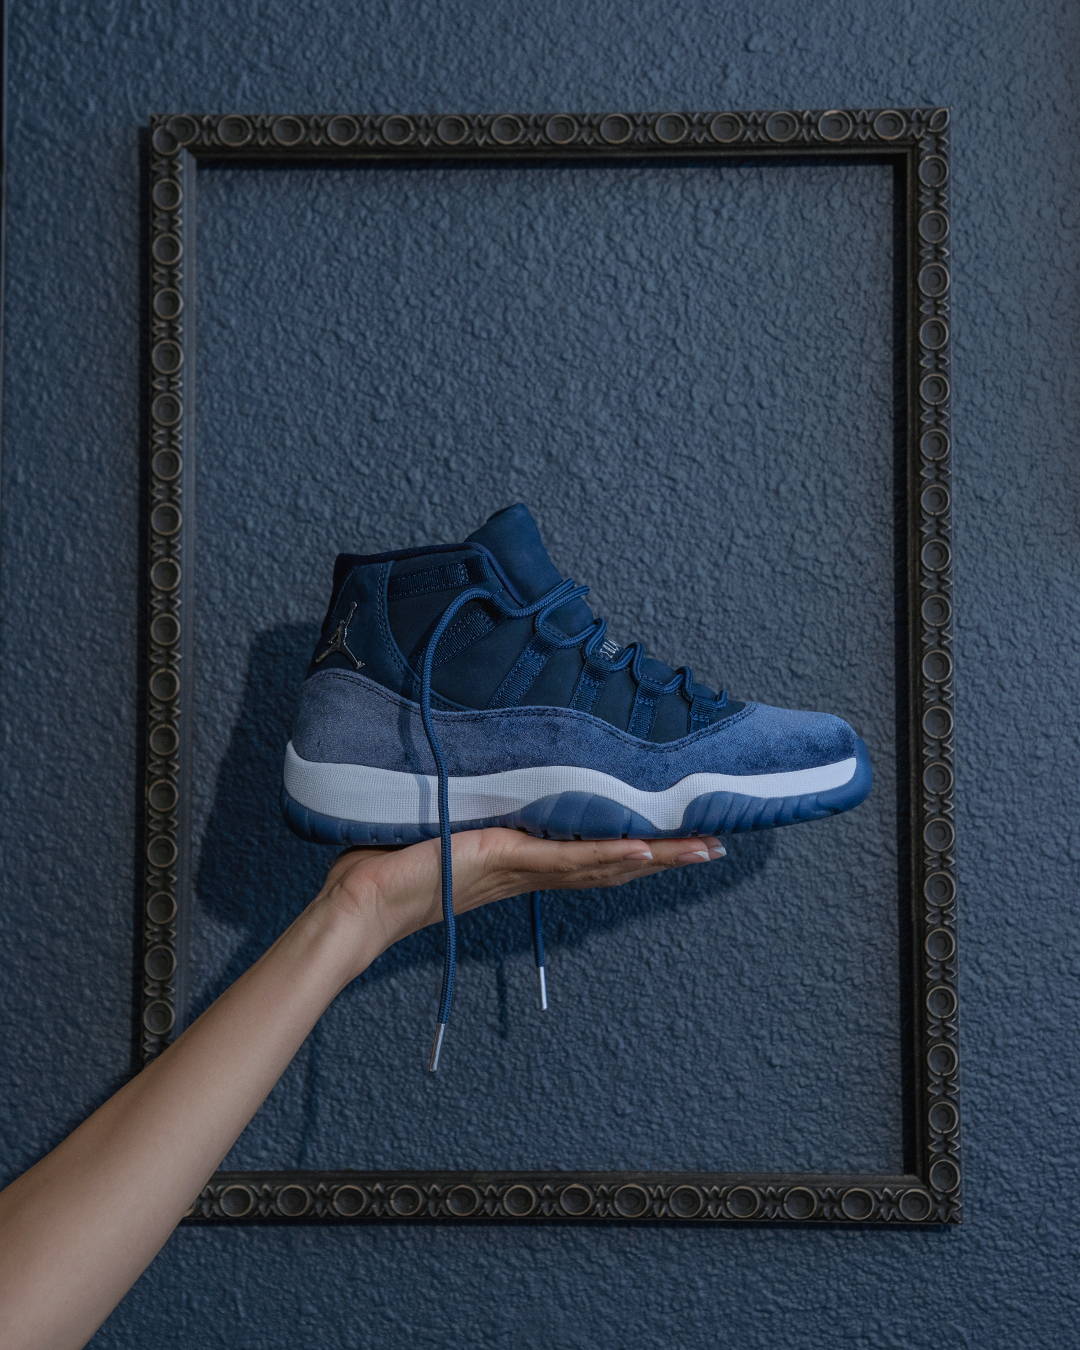 aj11 retro midnight navy in a picture frame